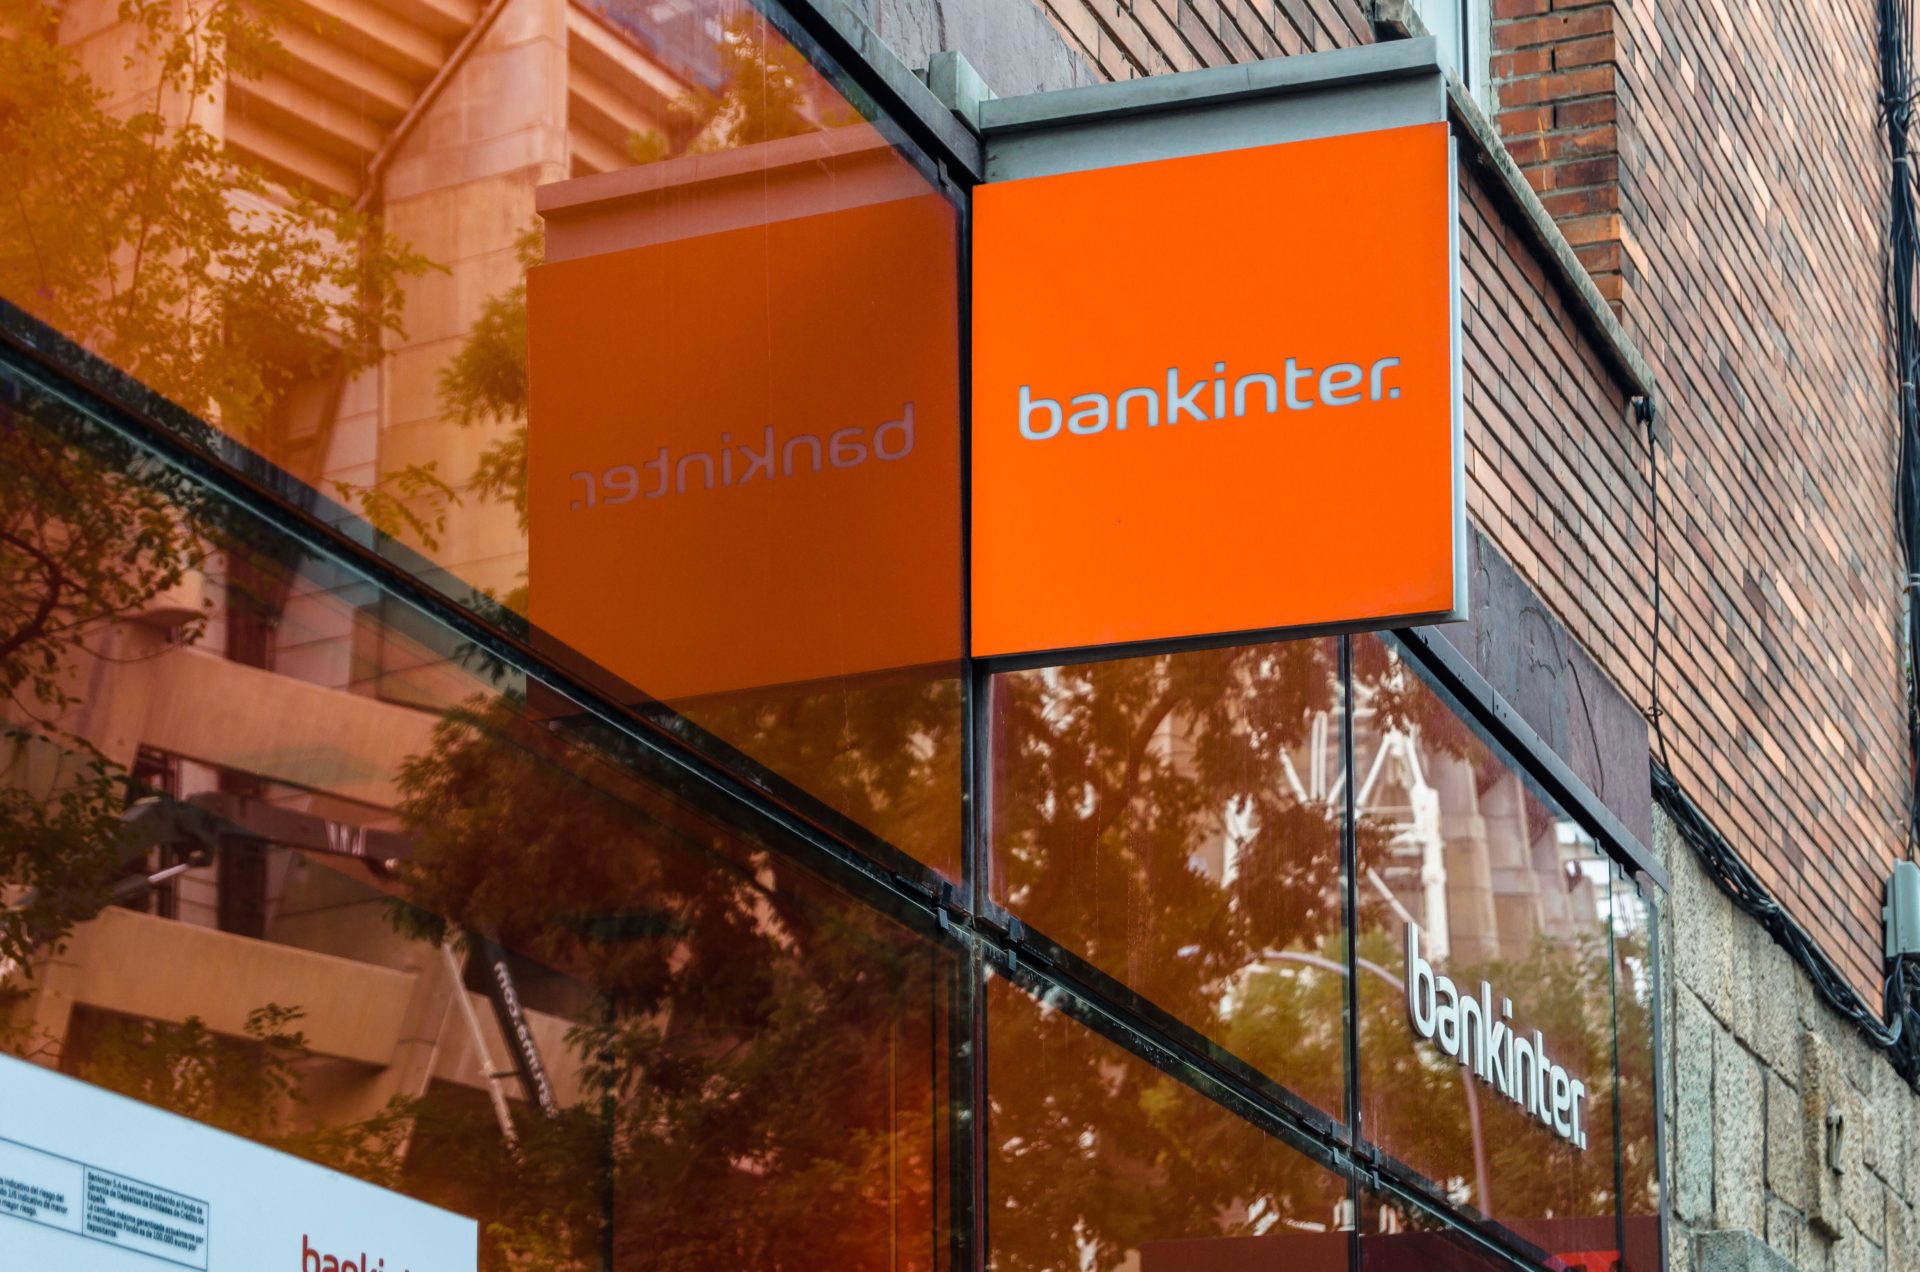 A Bankinter sign in Madrid, 13-9-21.